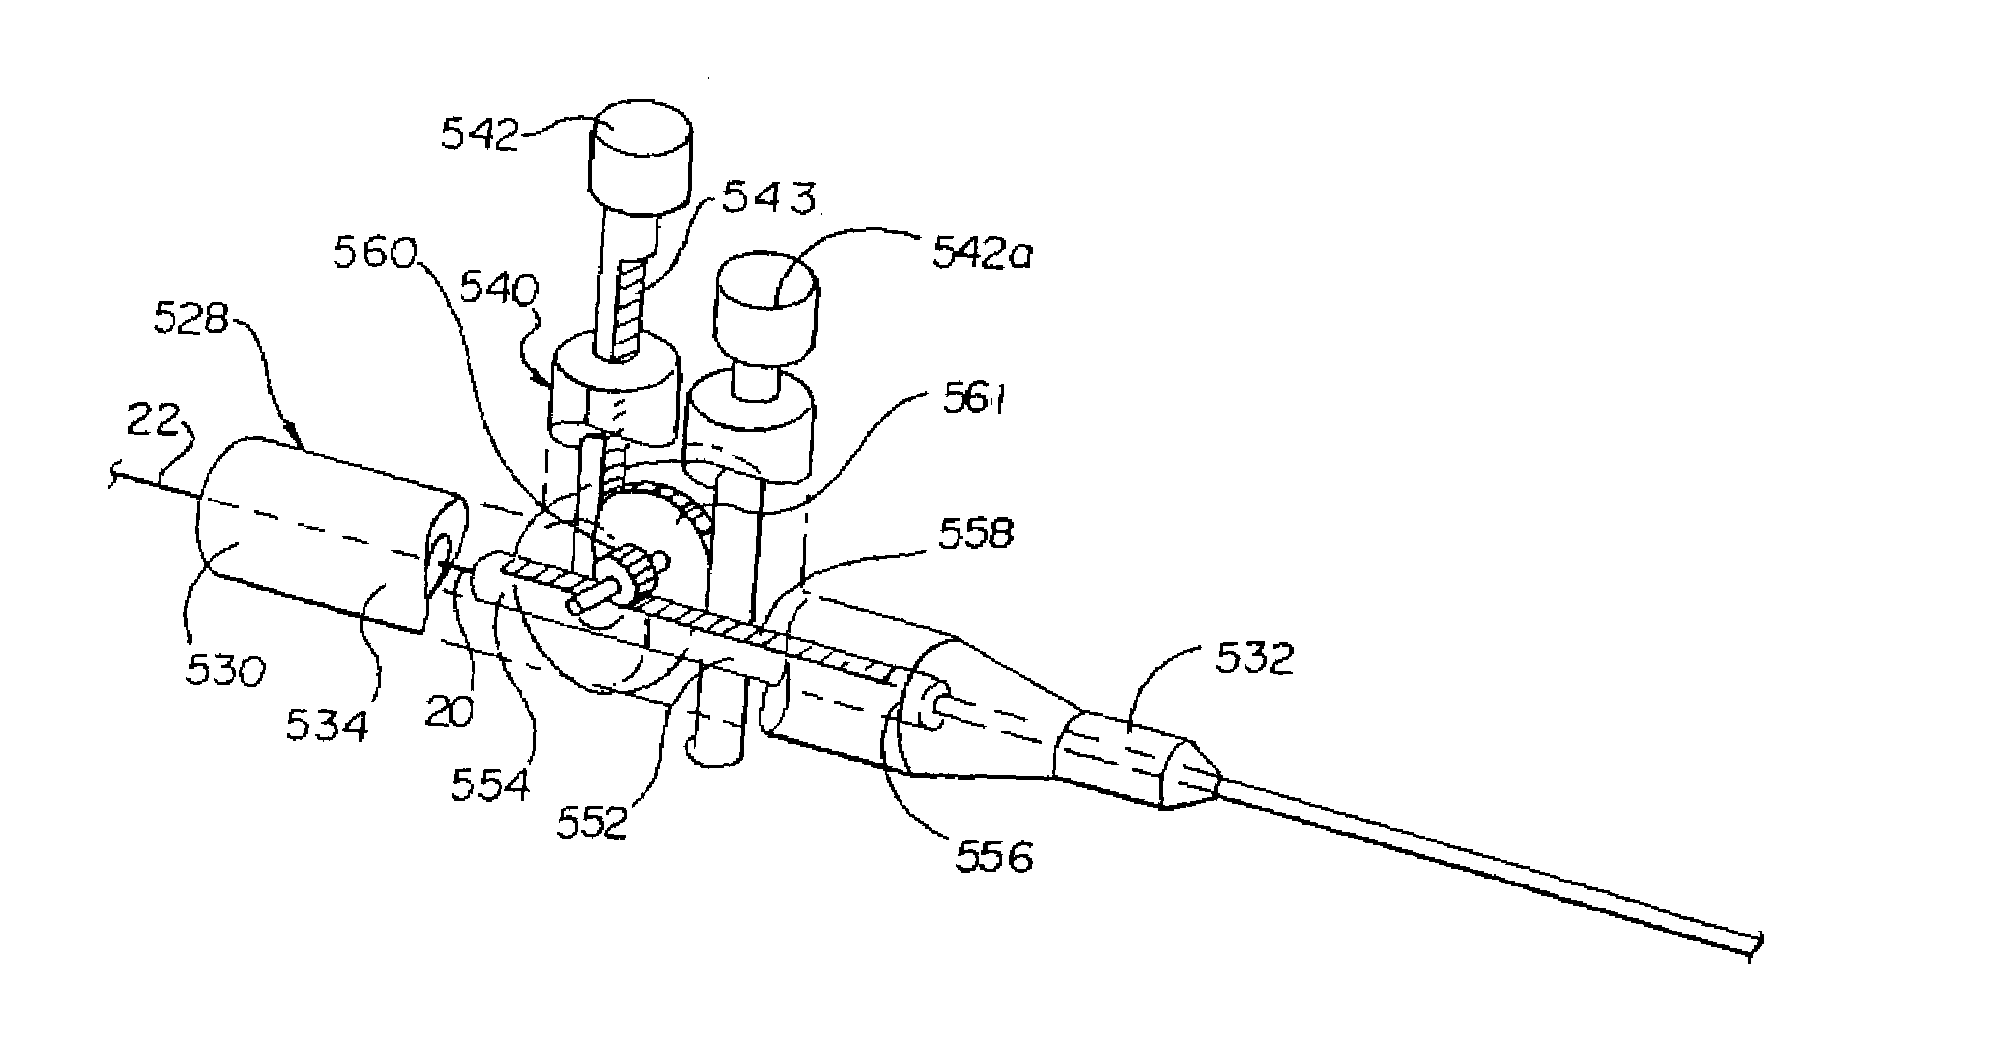 Delivery and retrieval manifold for a distal protection filter